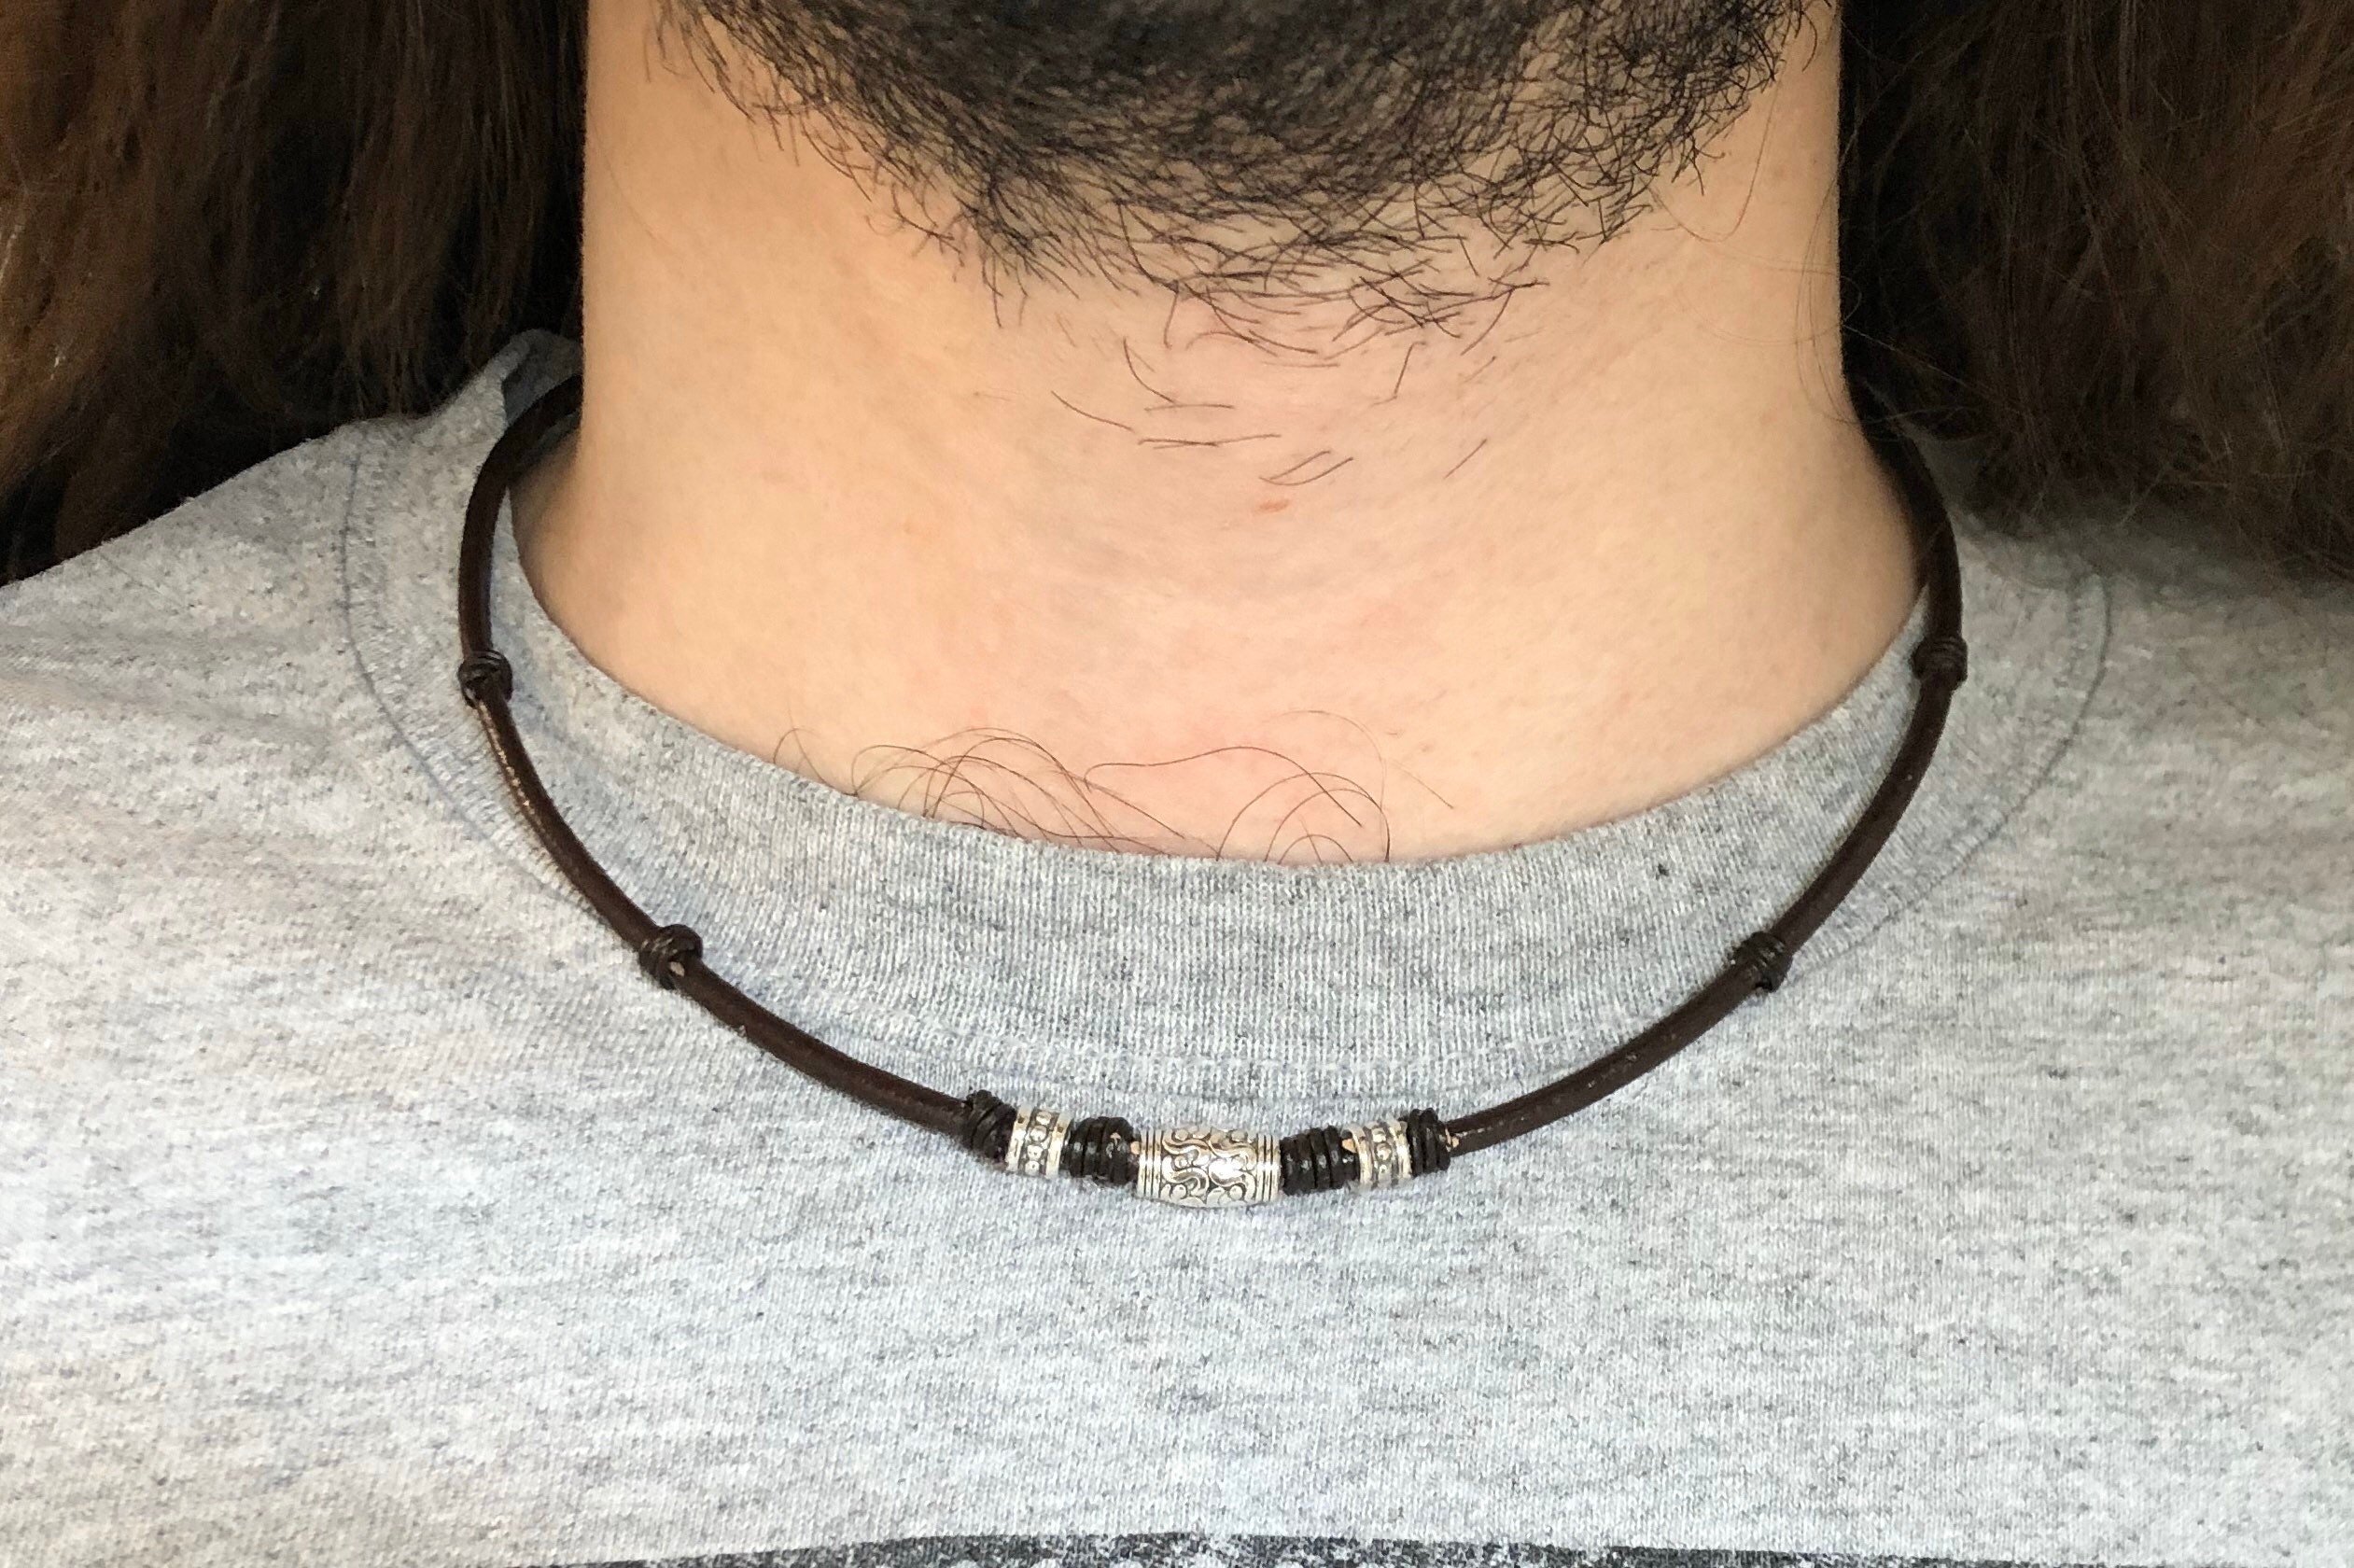  Mens Back Fabric Necklace  Necklace For Men Set With a  Stainless Steel Bead - Handmade Choker Necklace For Men - 17.7” Total  Length : Handmade Products